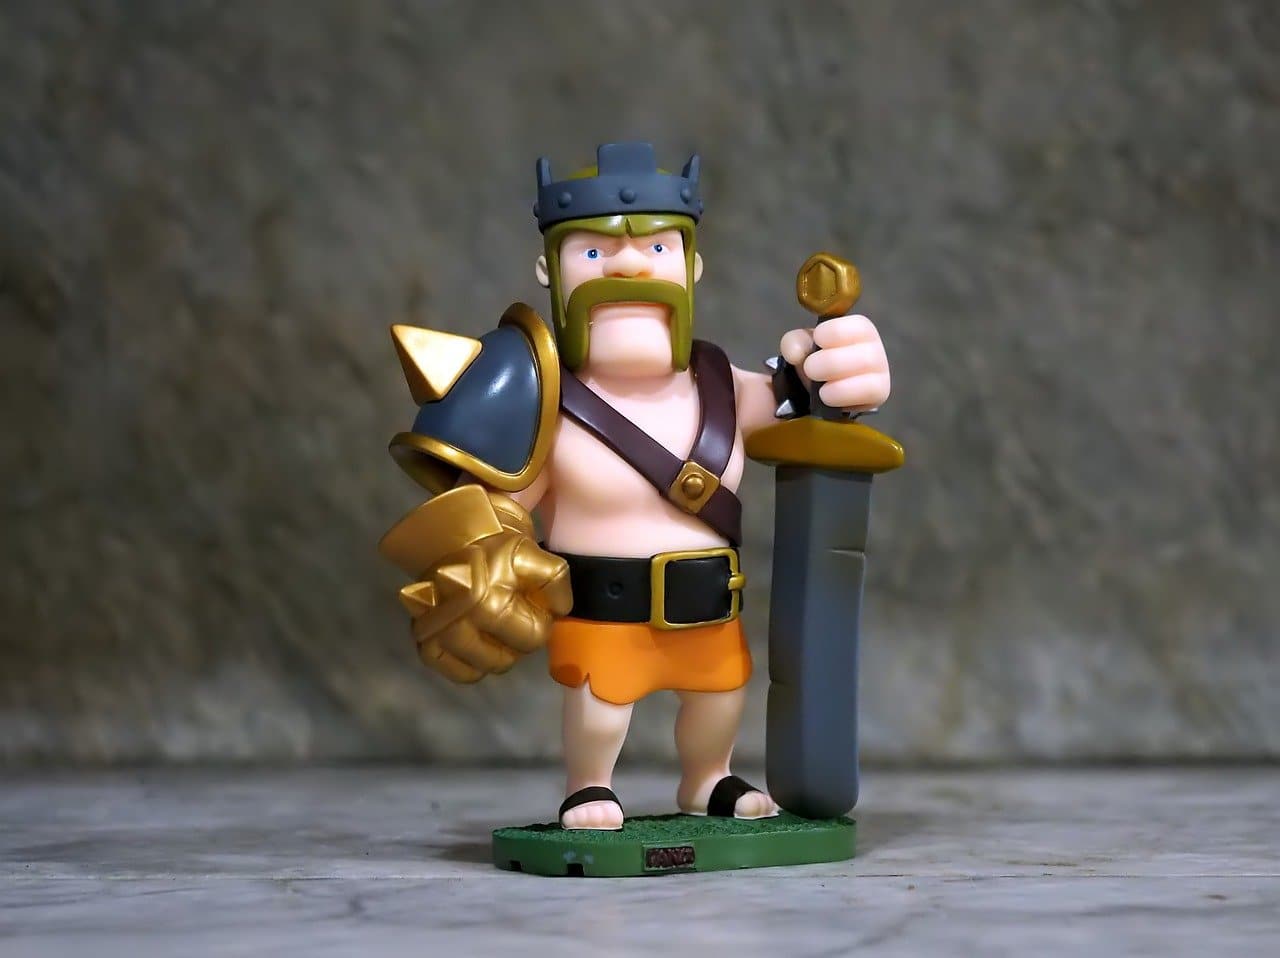 Clash of Clans character figurine